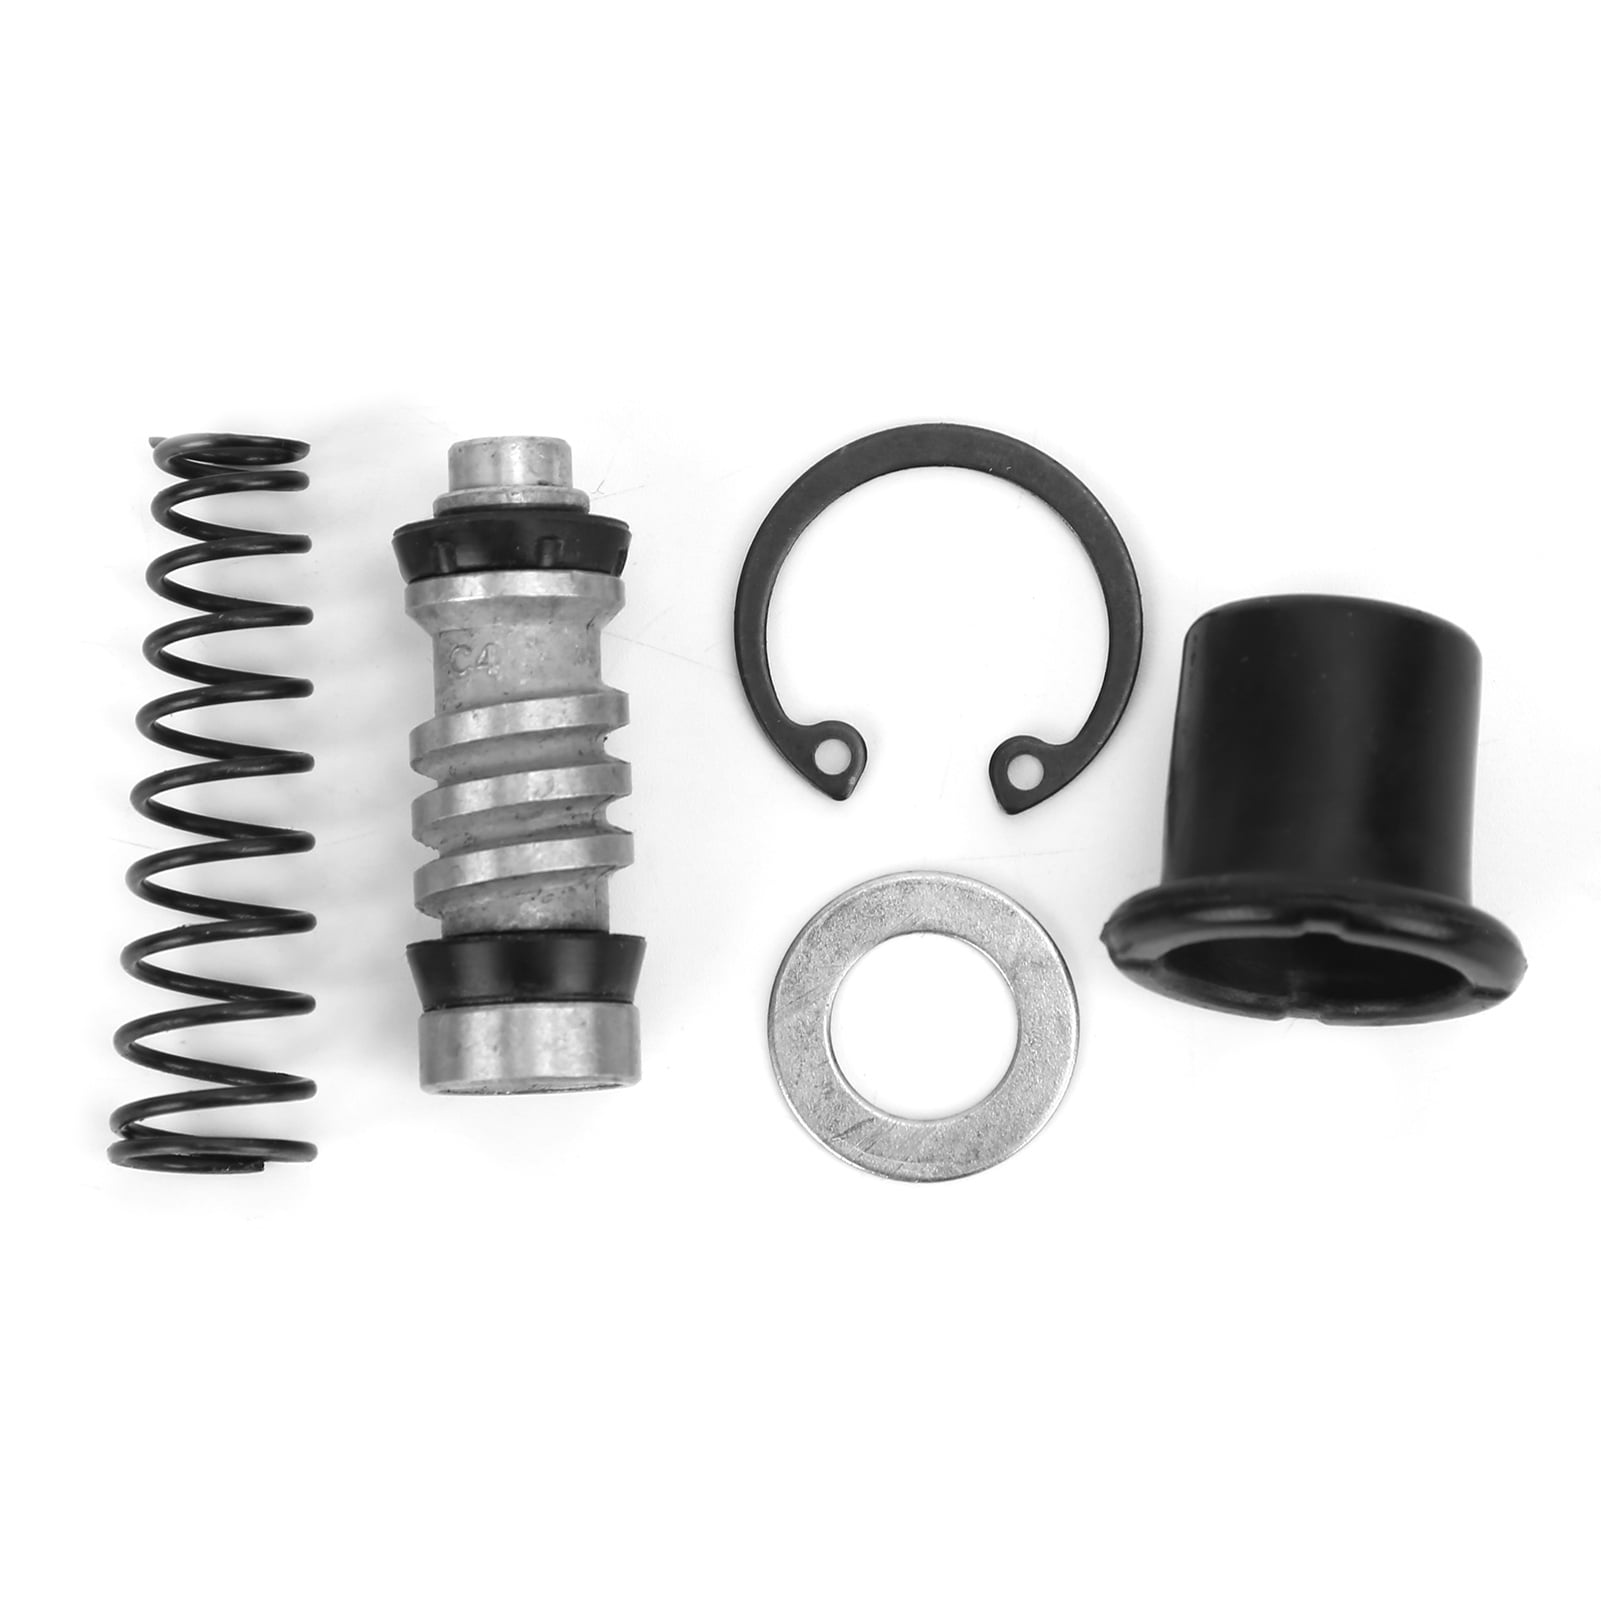 Brake Cylinders Piston Spring Durable Complete Kit For 12.7mm Hydraulic Clutch Motorcycle Brake Master Cylinder Kit For DIY/Professional rRepairer 